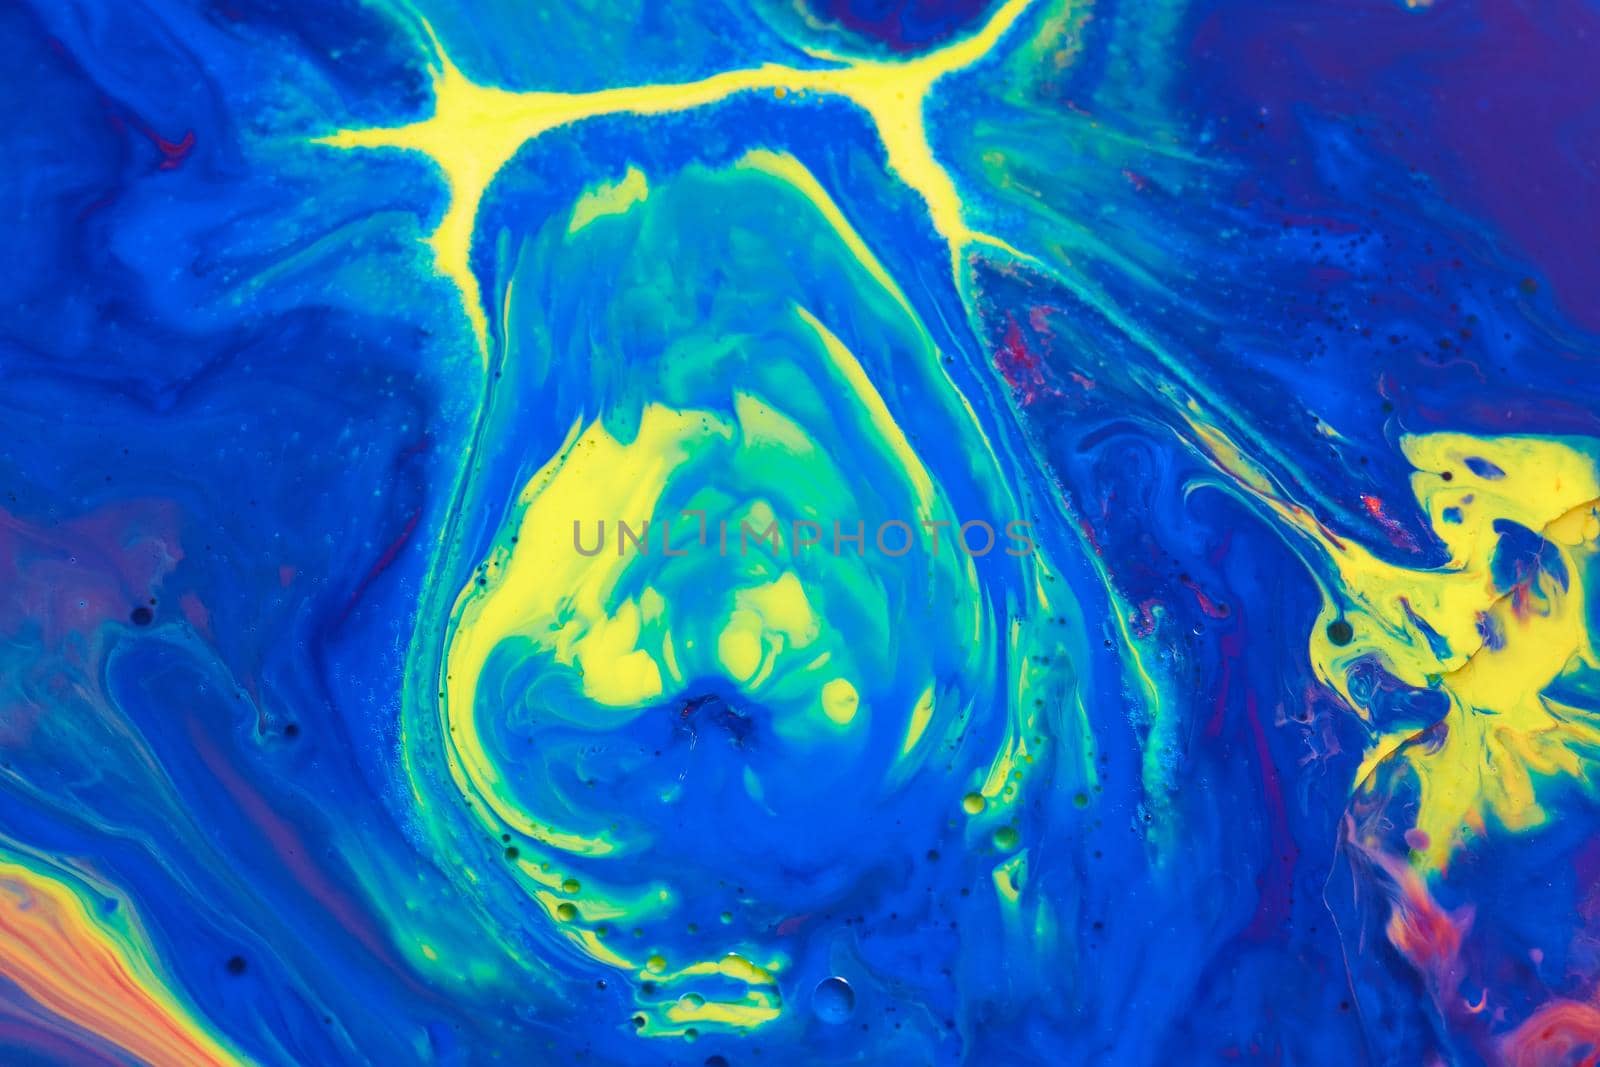 Image of Surface of liquid with colorful mix of blue and yellow to make green